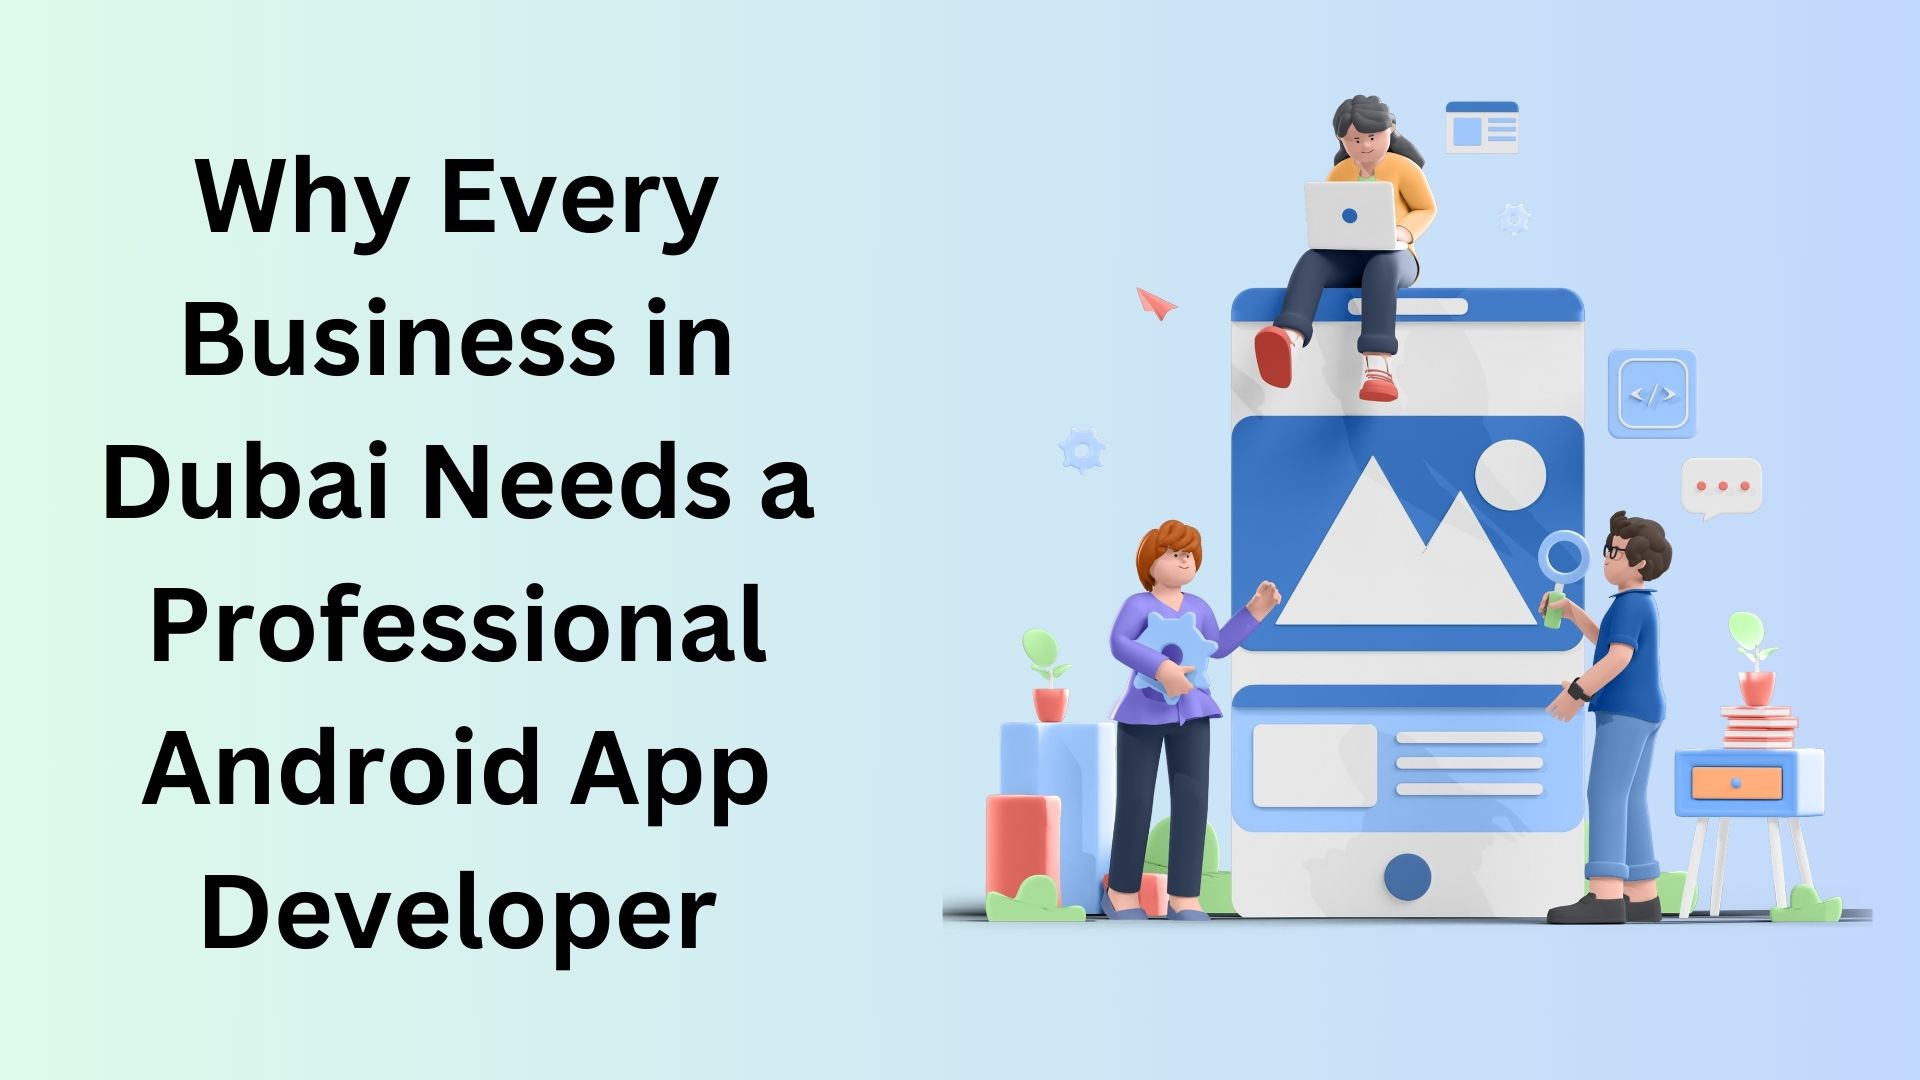 Why Every Business in Dubai Needs a Professional Android App Developer